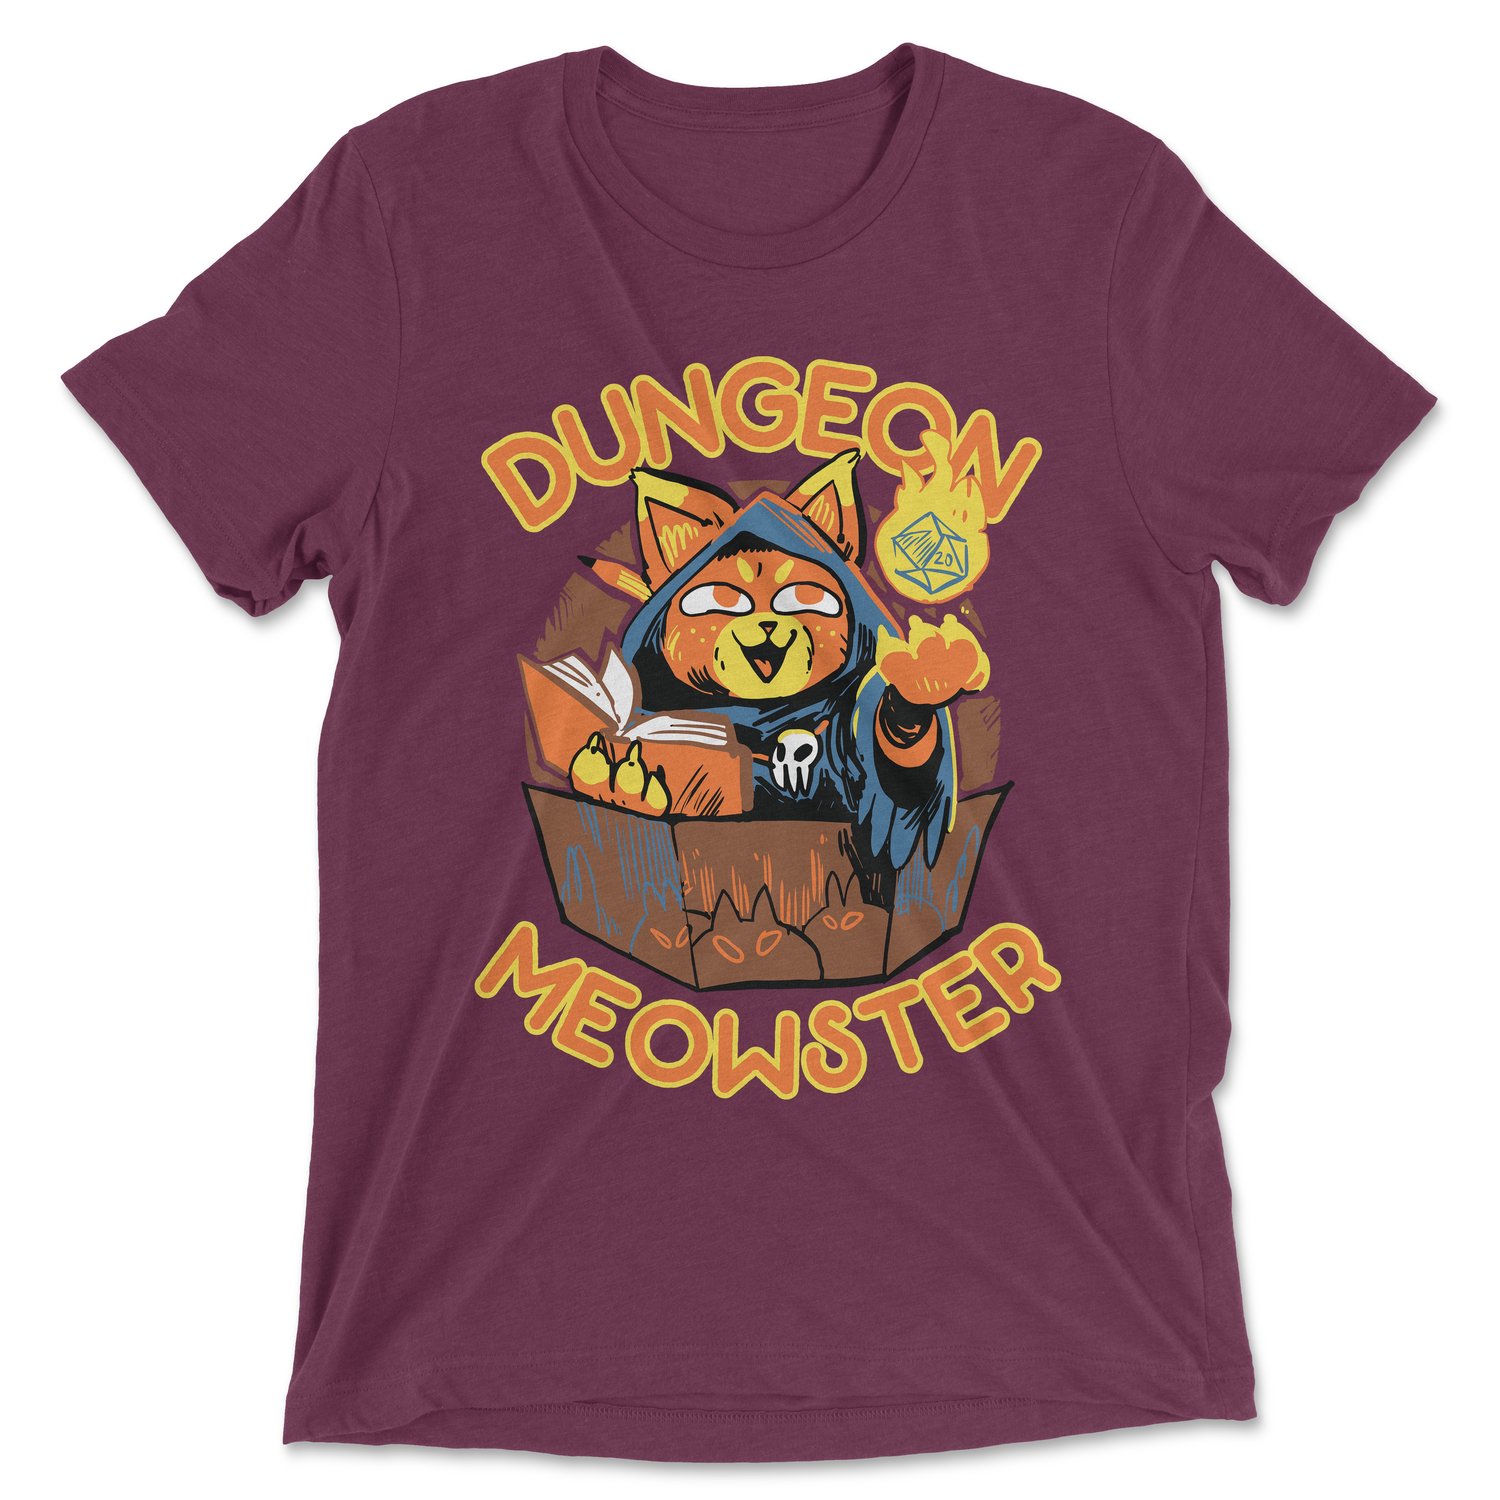 Image of Dungeon Meowster Shirt